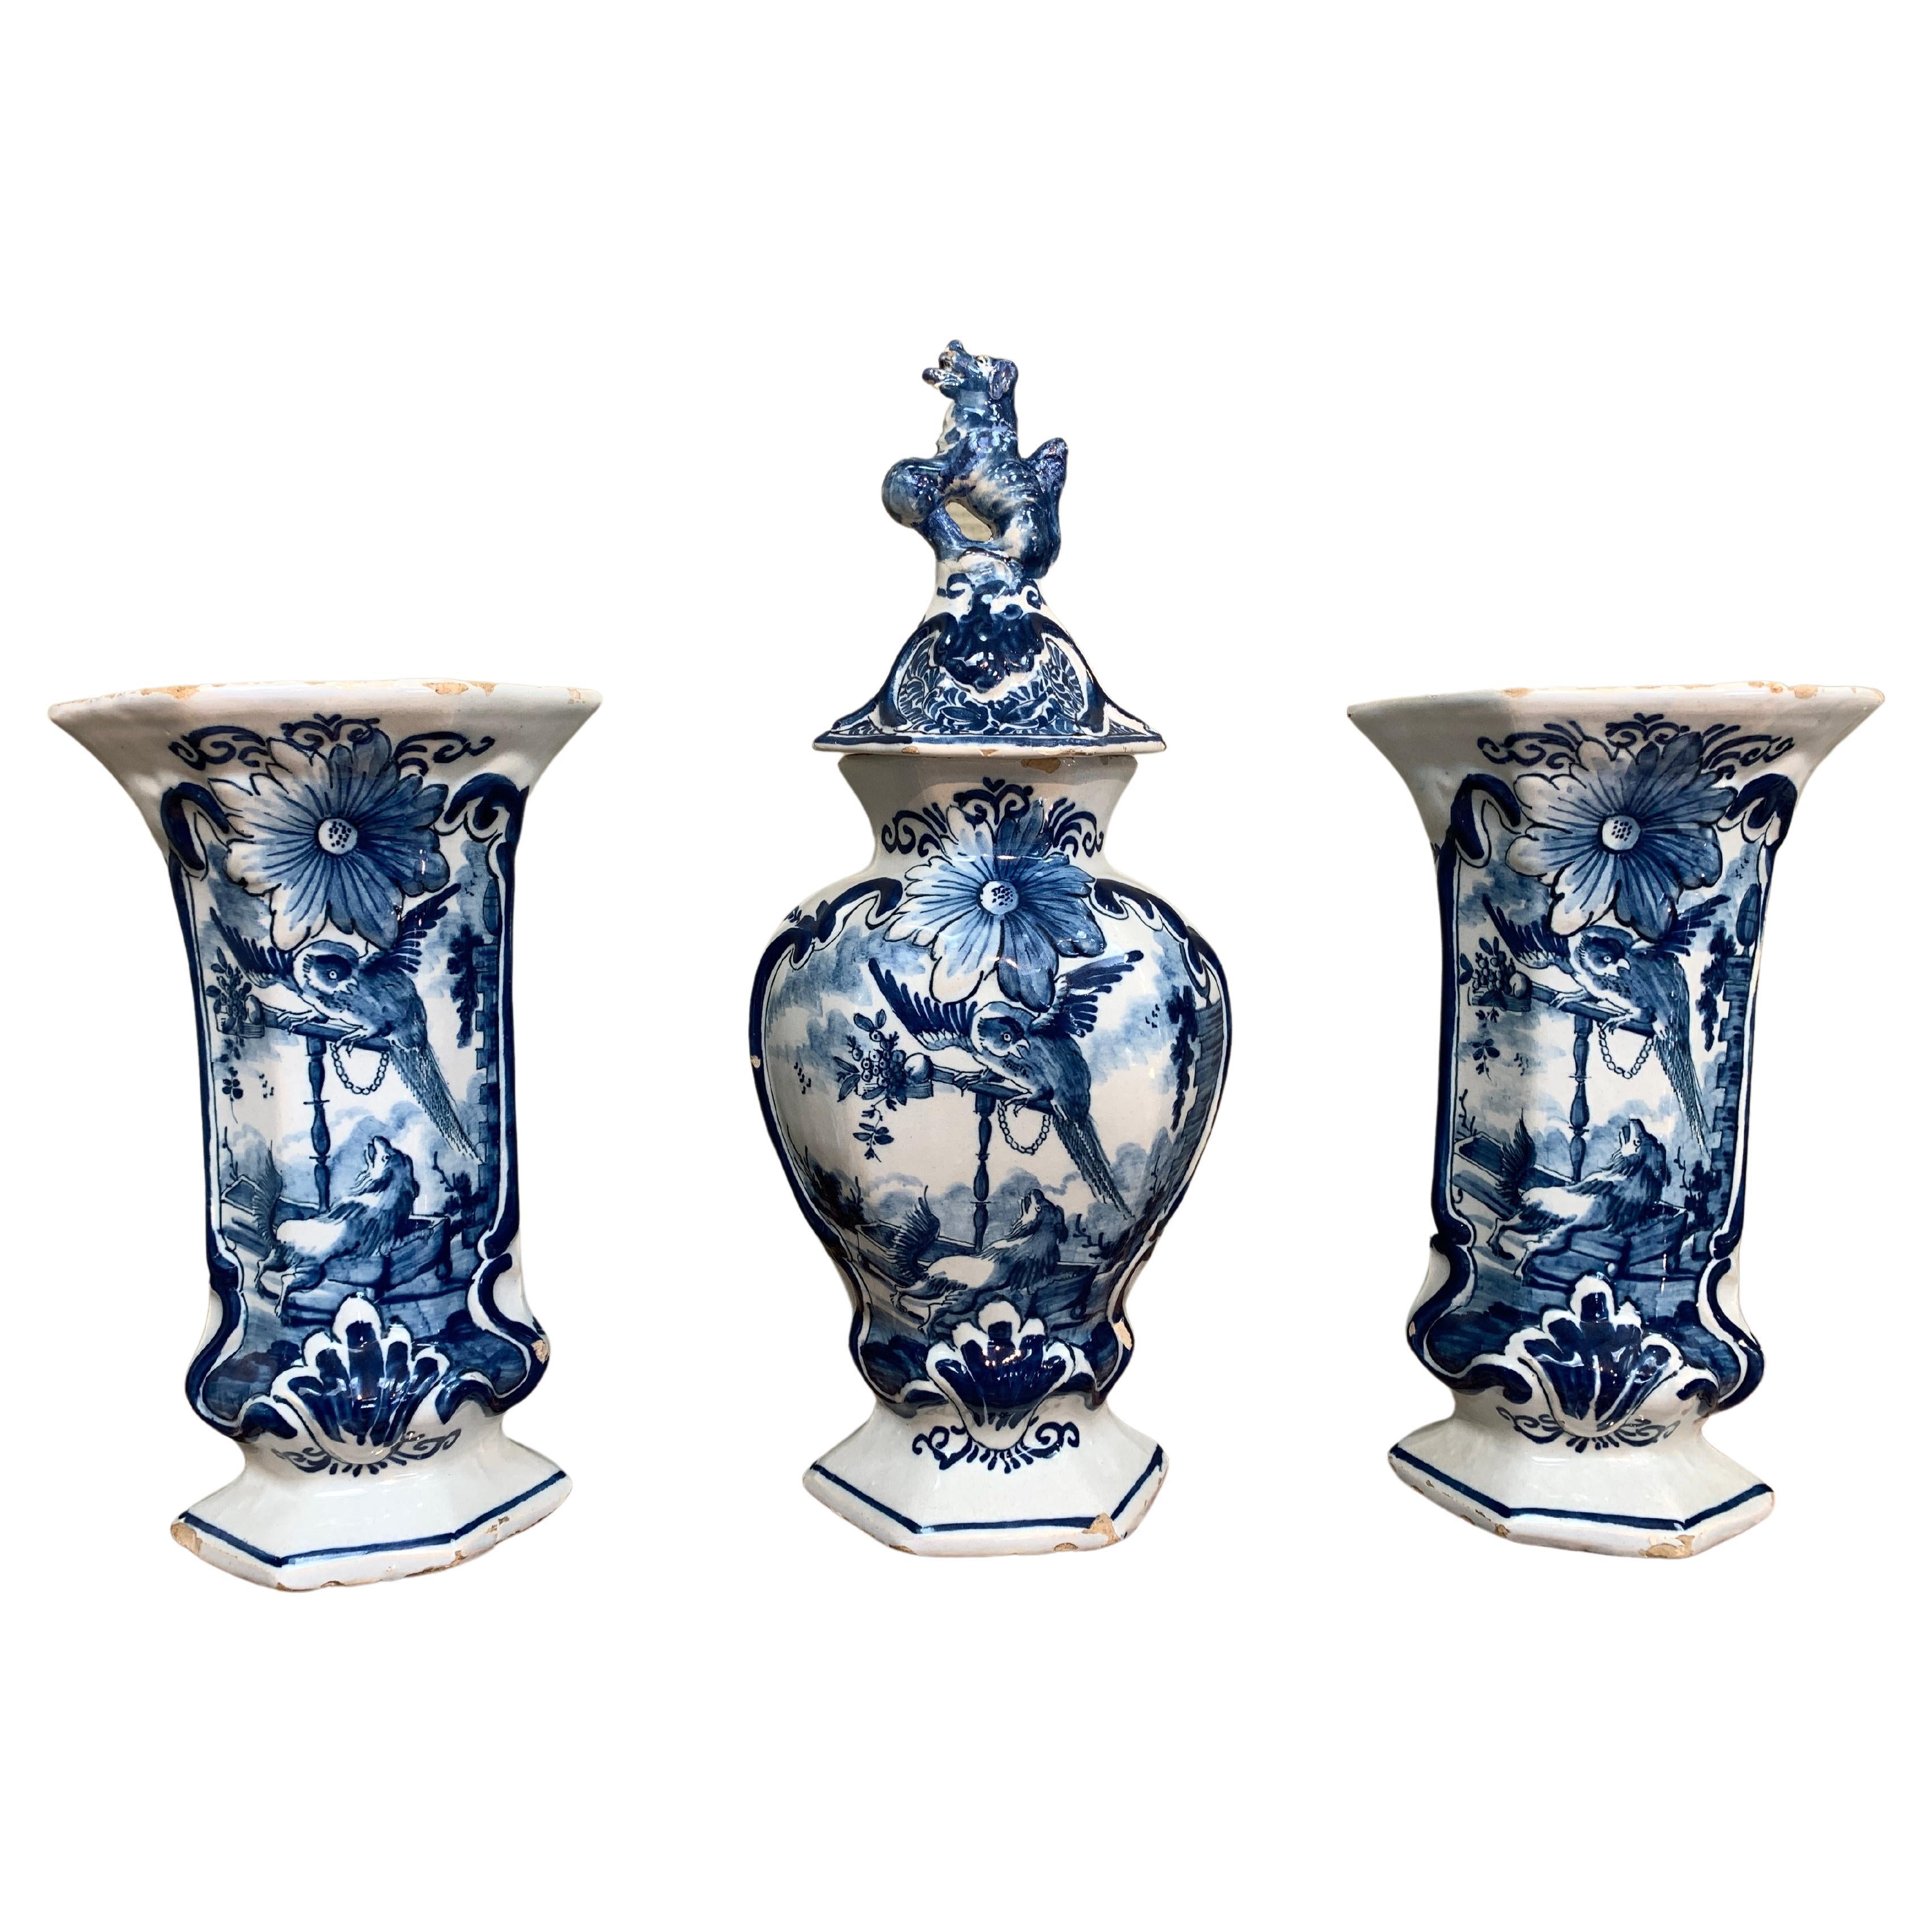 Dutch Delft Three Piece Garniture with Dog and Parrot, Vases Set, 18th Century For Sale